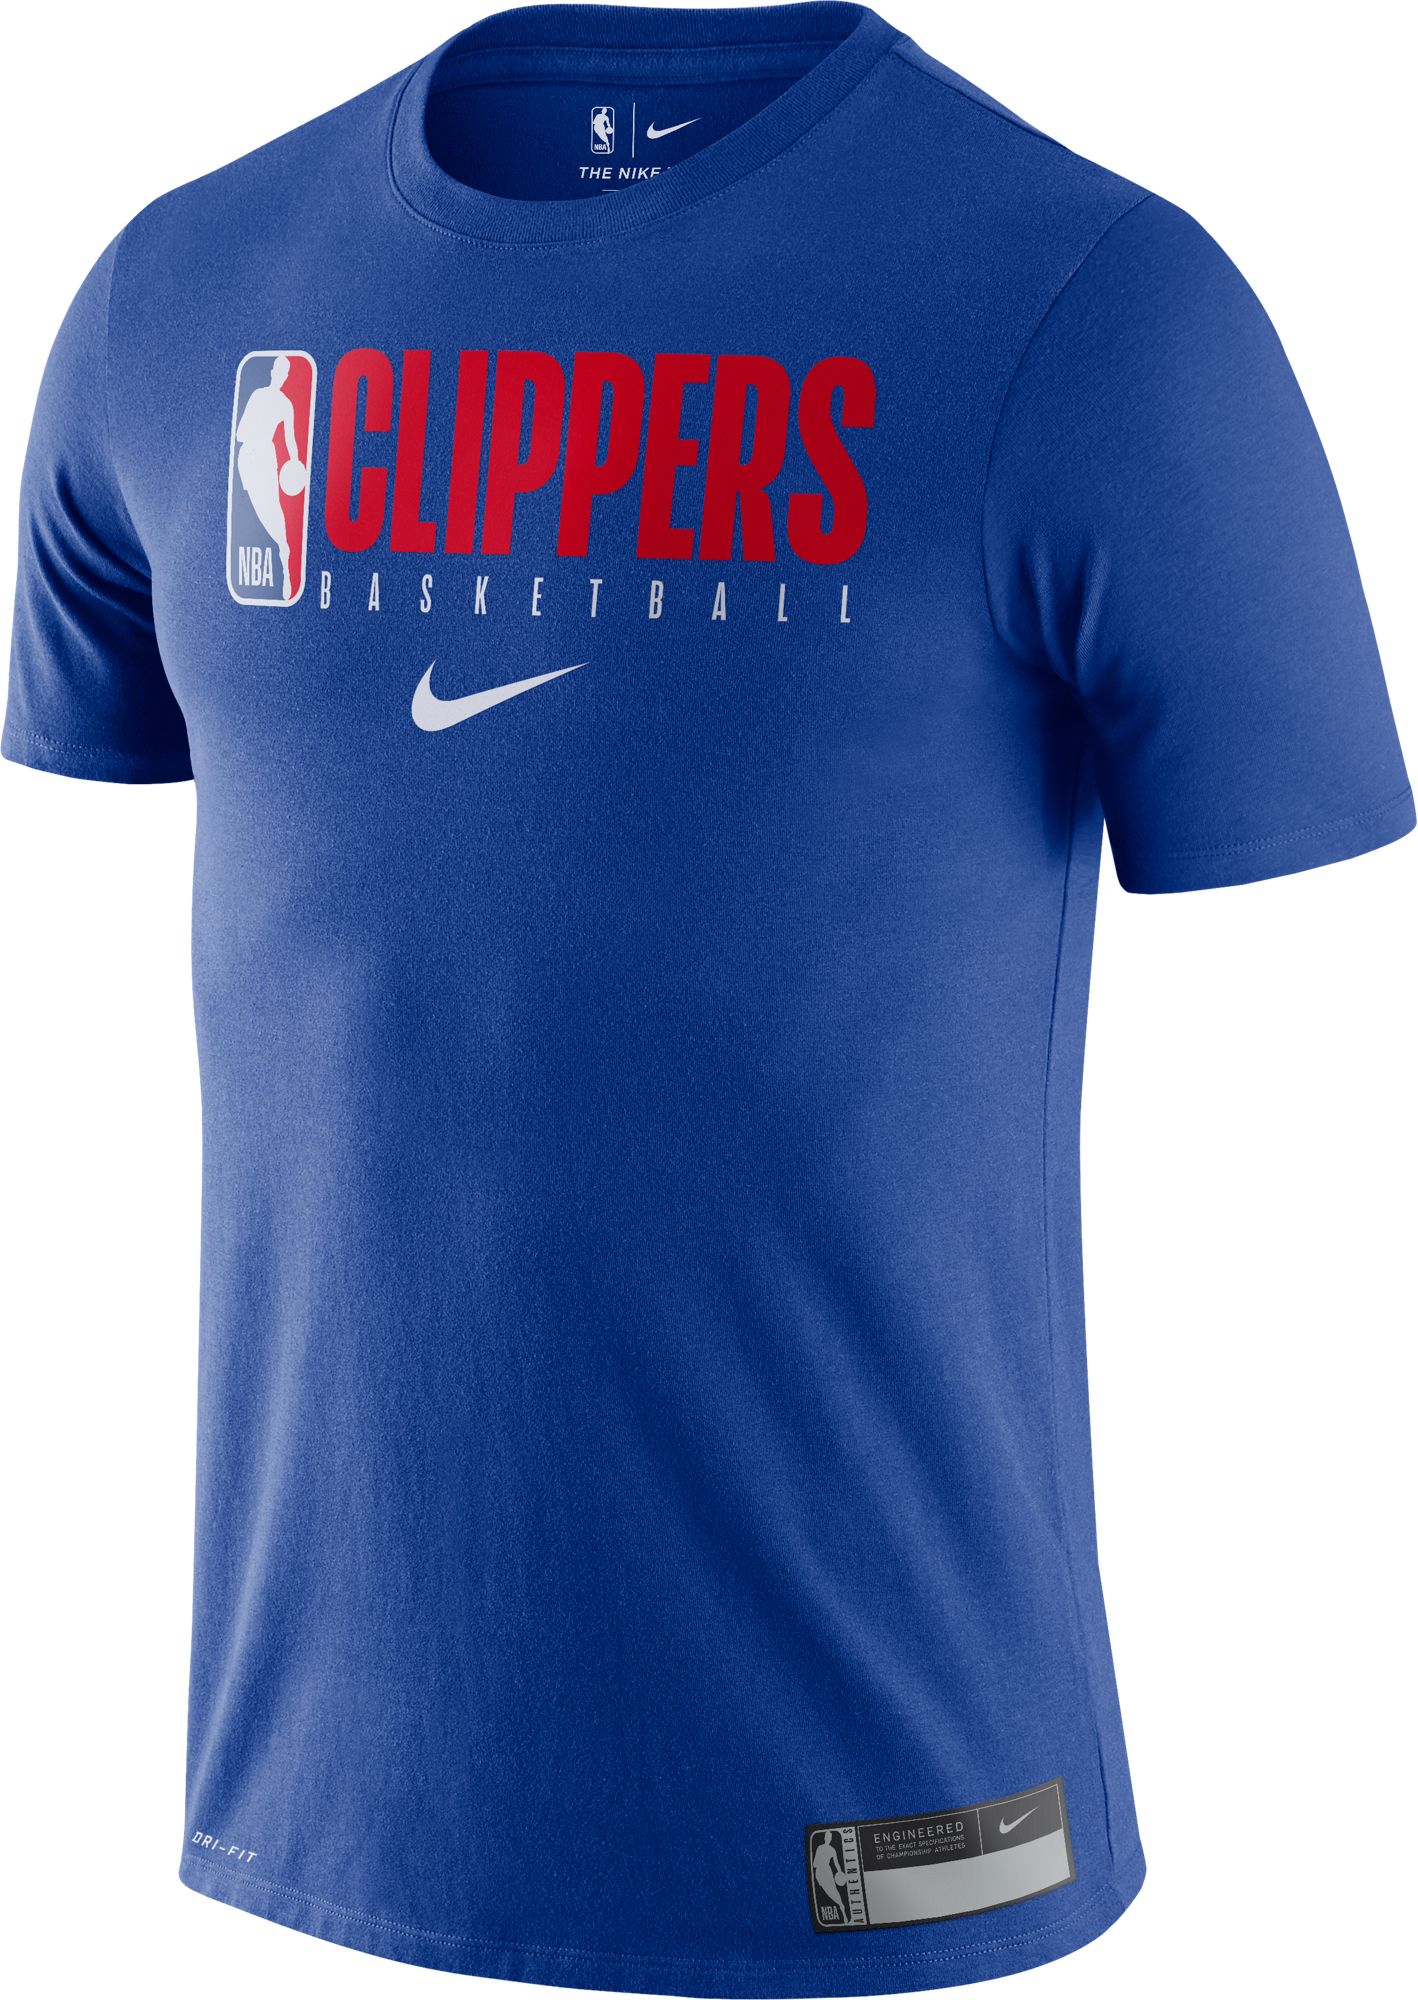 clippers t shirt nike